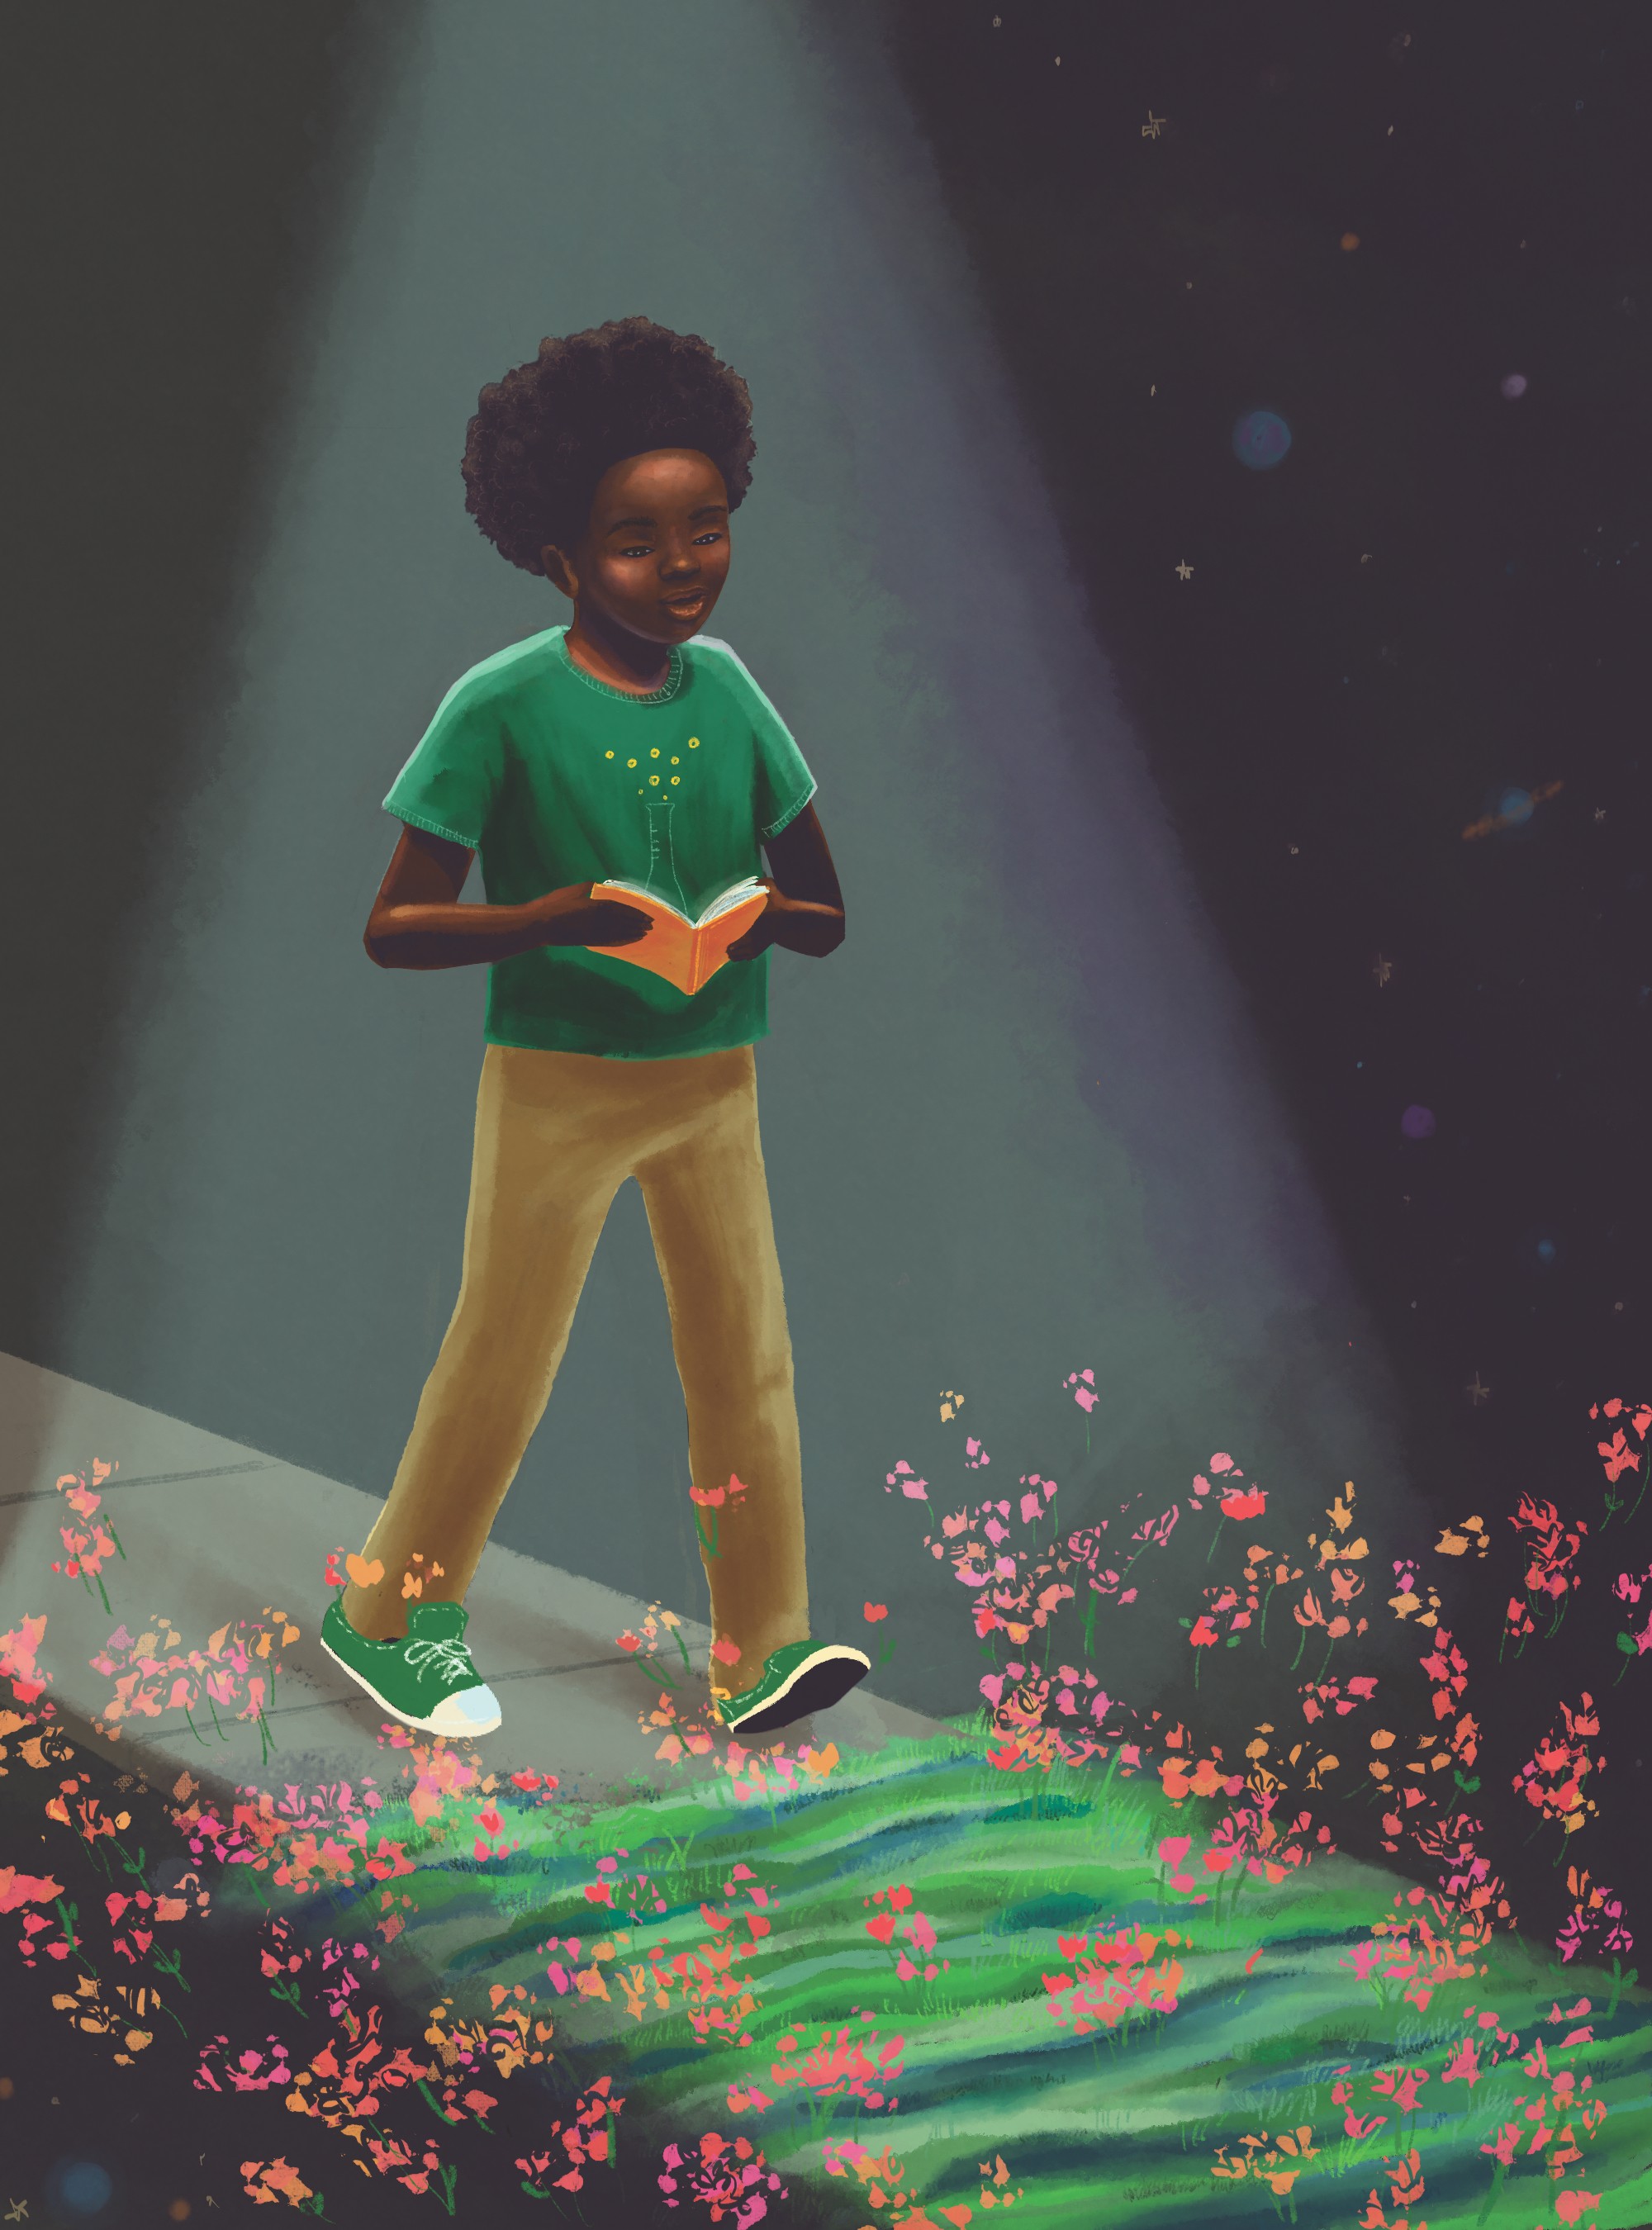 Illustration of a Black youth in a green t-shirt walking with an orange book in her hands. The background is black with flowers on the forefront.